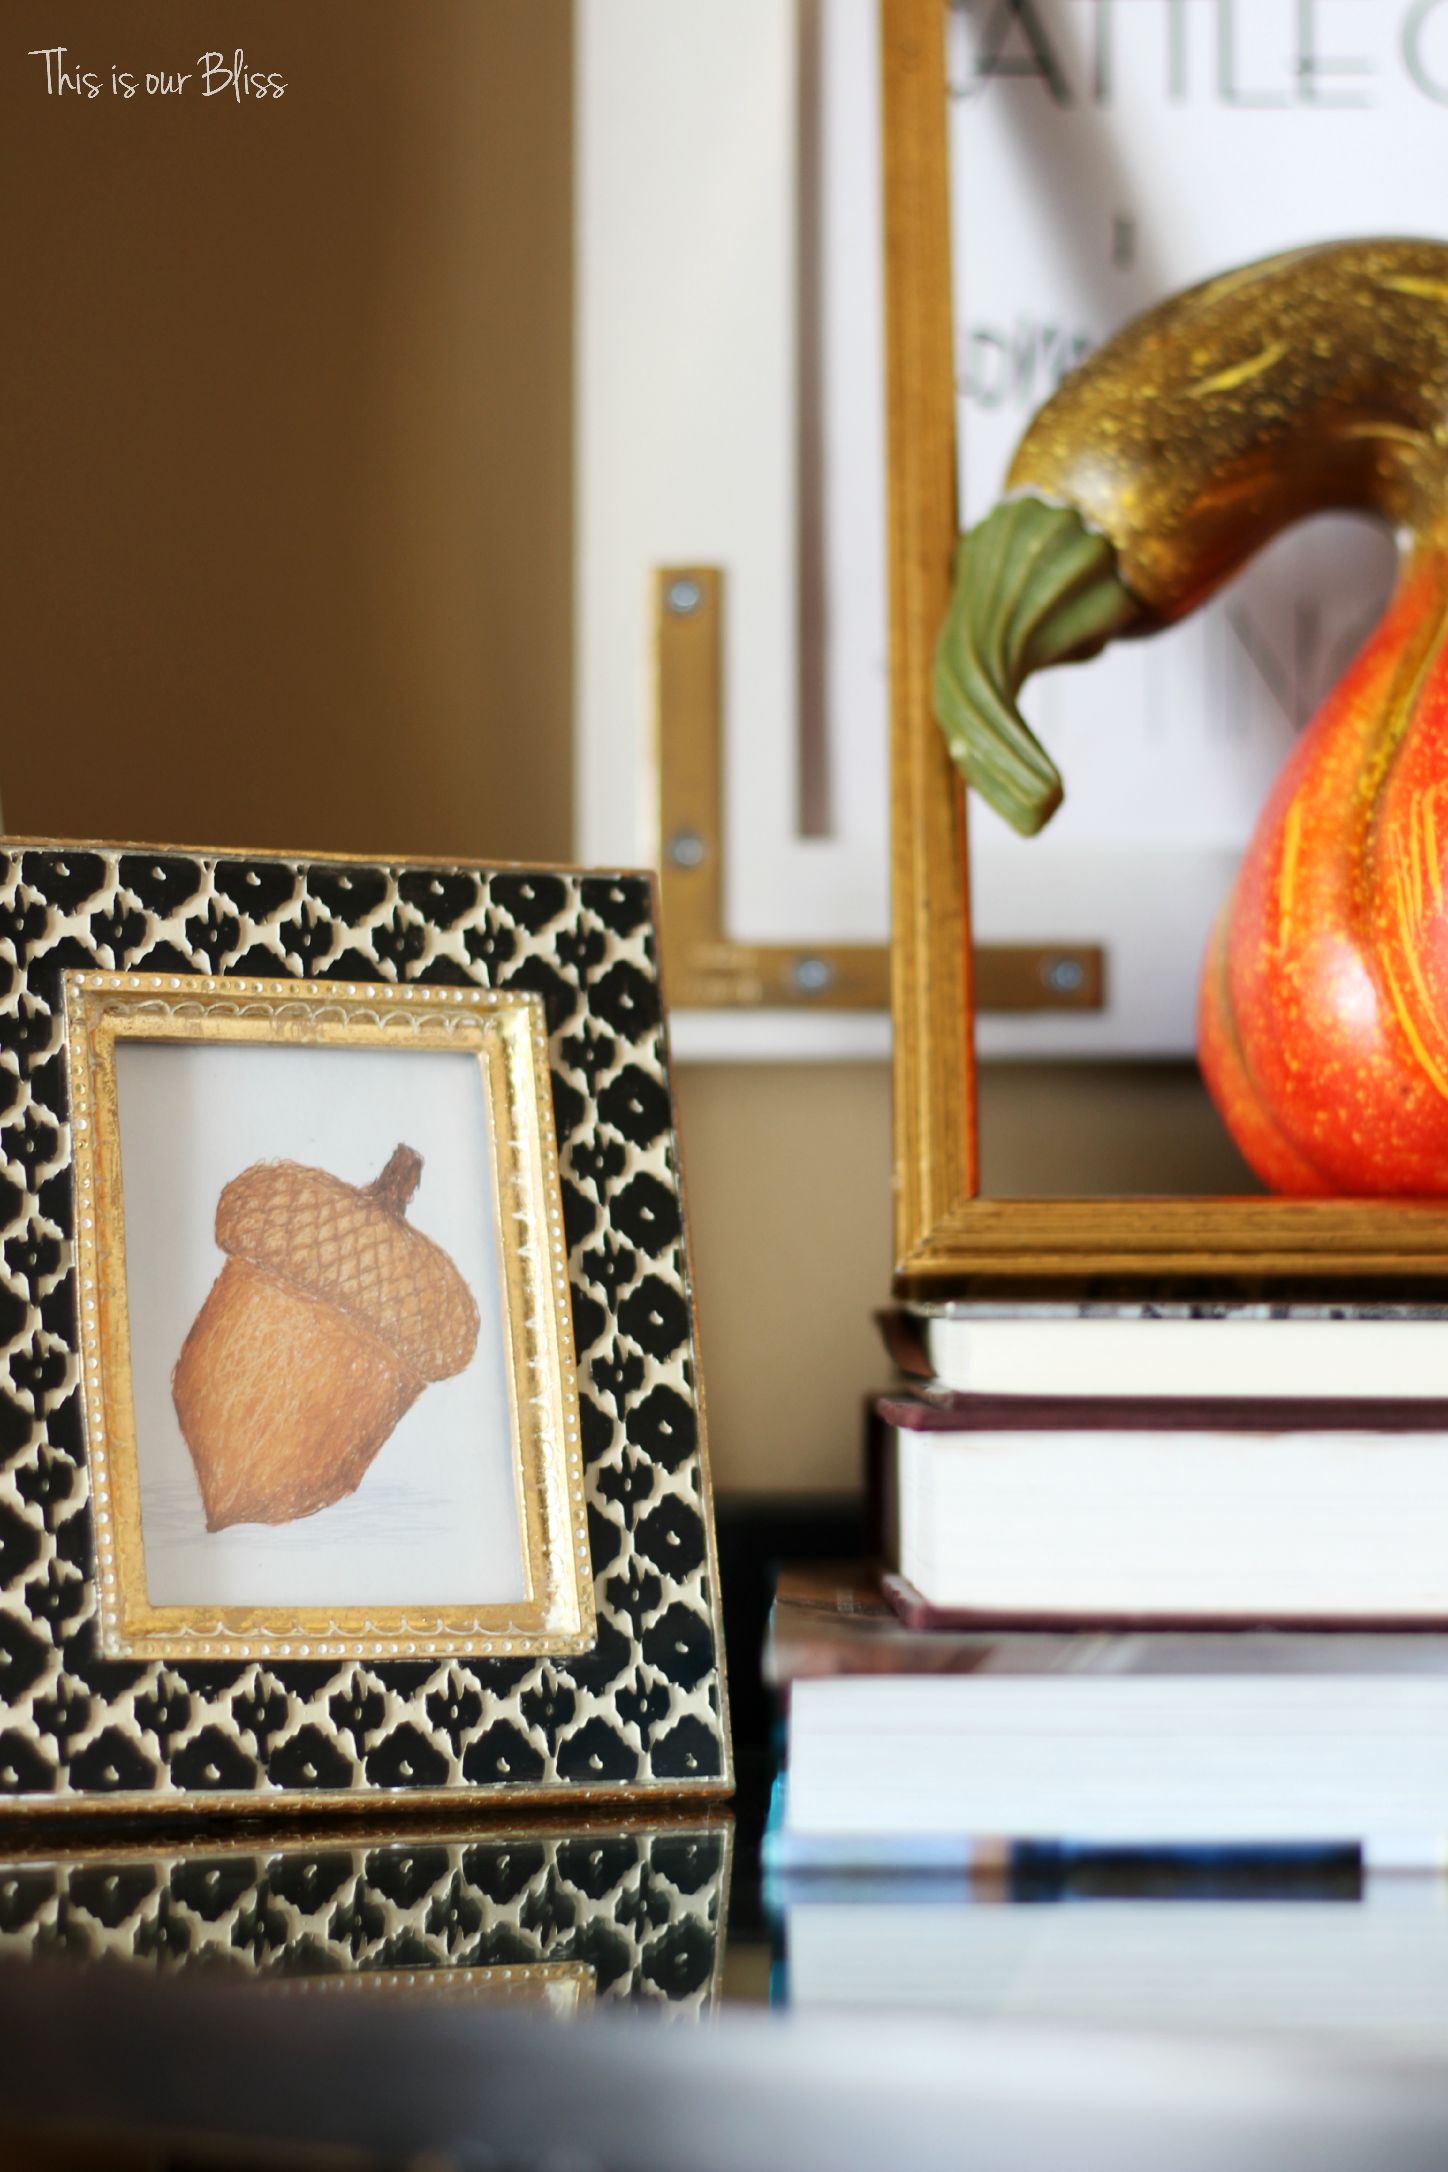 Fall entryway - fall vignette - entryway table styling - fall decor - neutral fall decor -staircase view - fall word art - mini framed acorn art - This is our Bliss